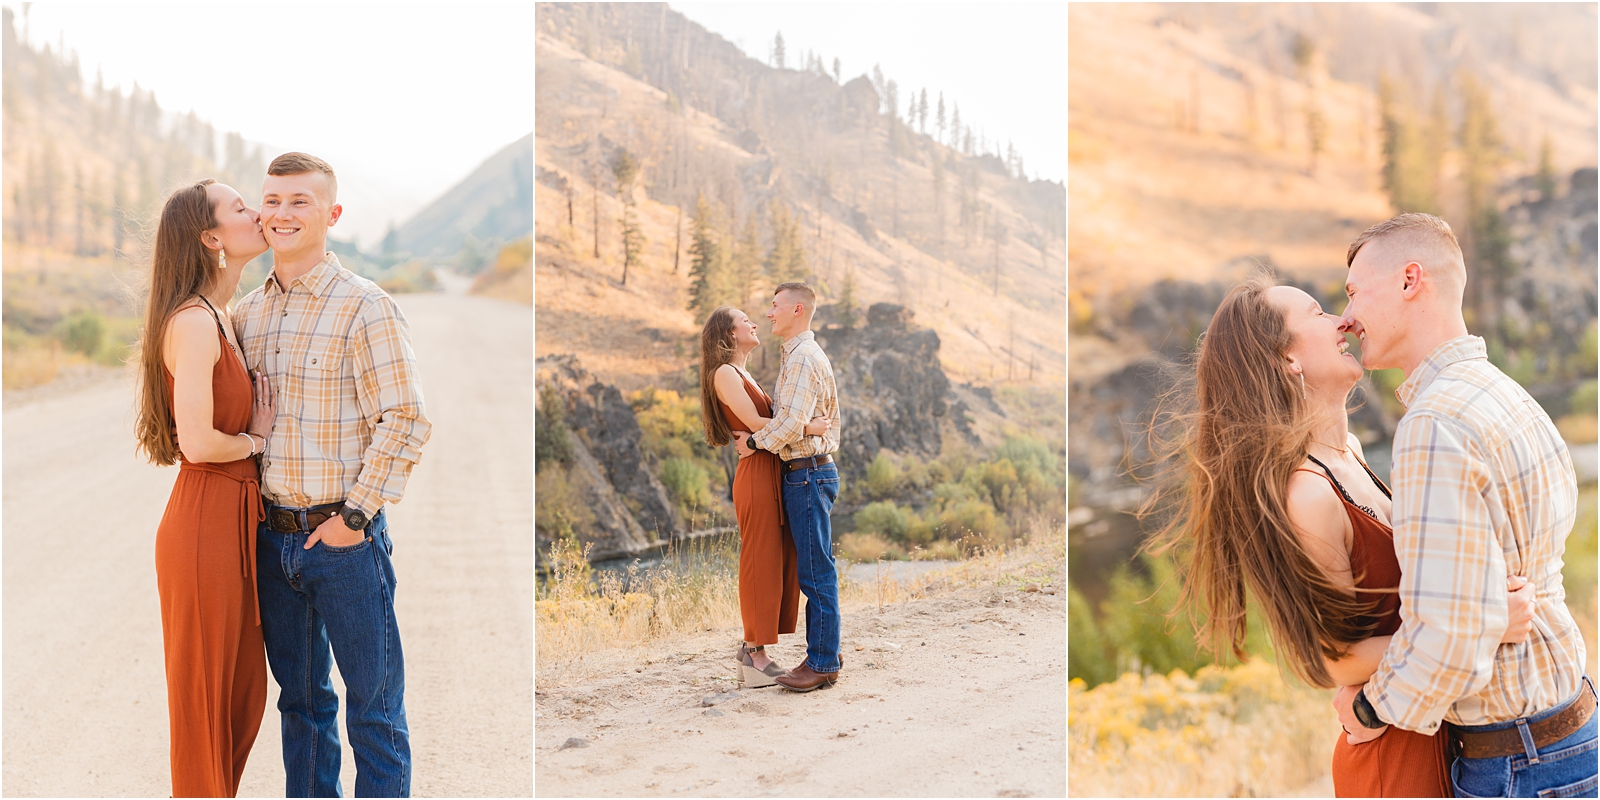 engaged Couples' Photo Session with mountains in the background at sunset in Idaho